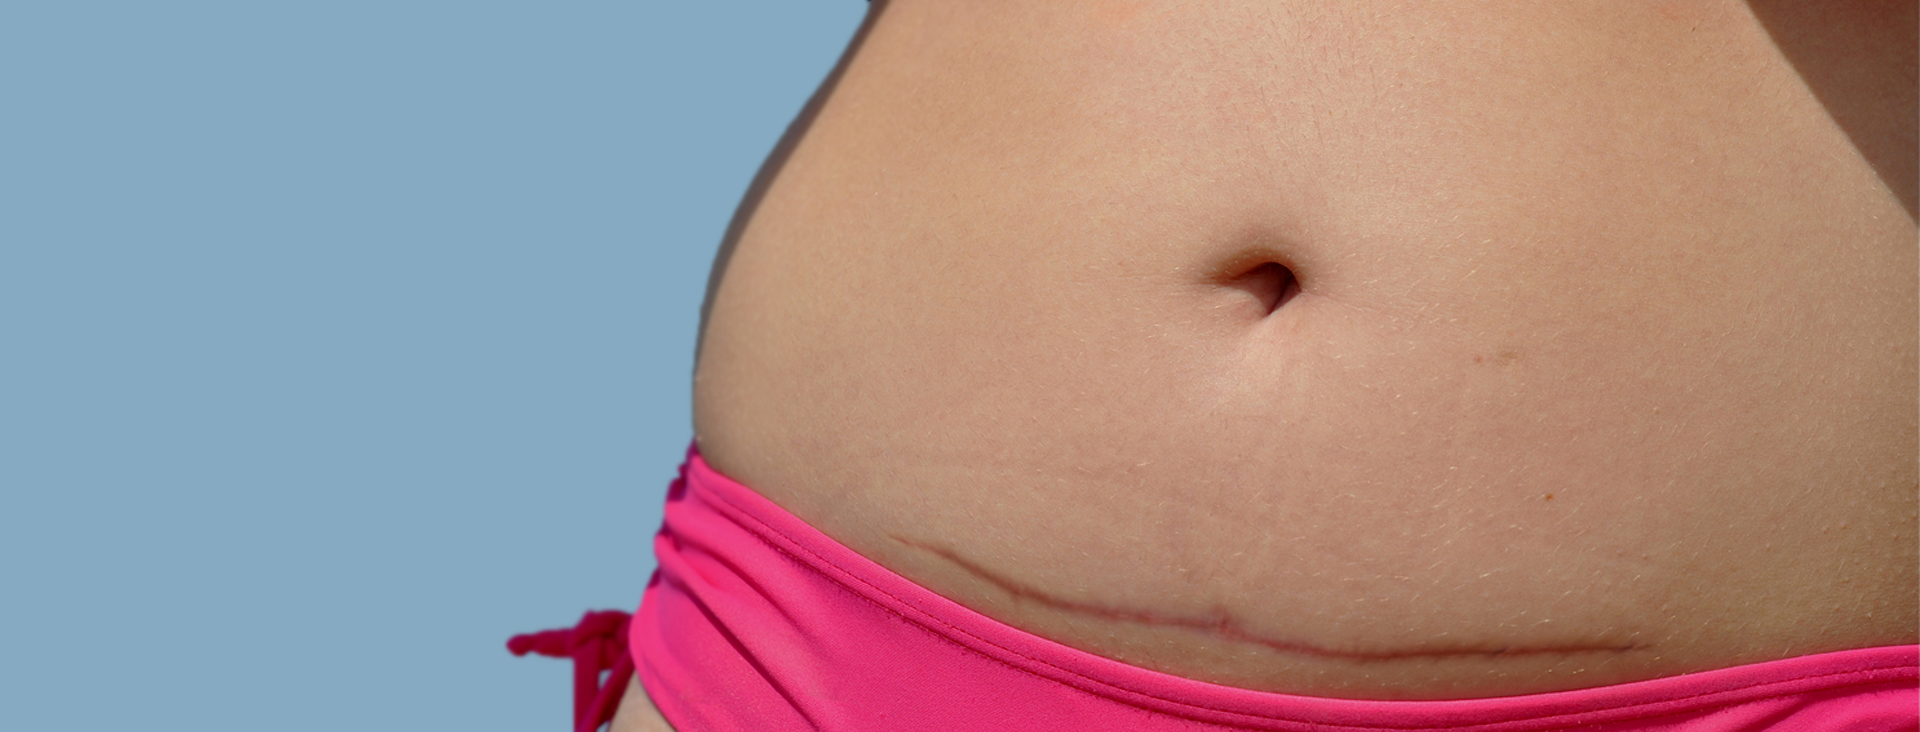 How To Get Rid Of Hanging Belly After C-Section - Top Tips